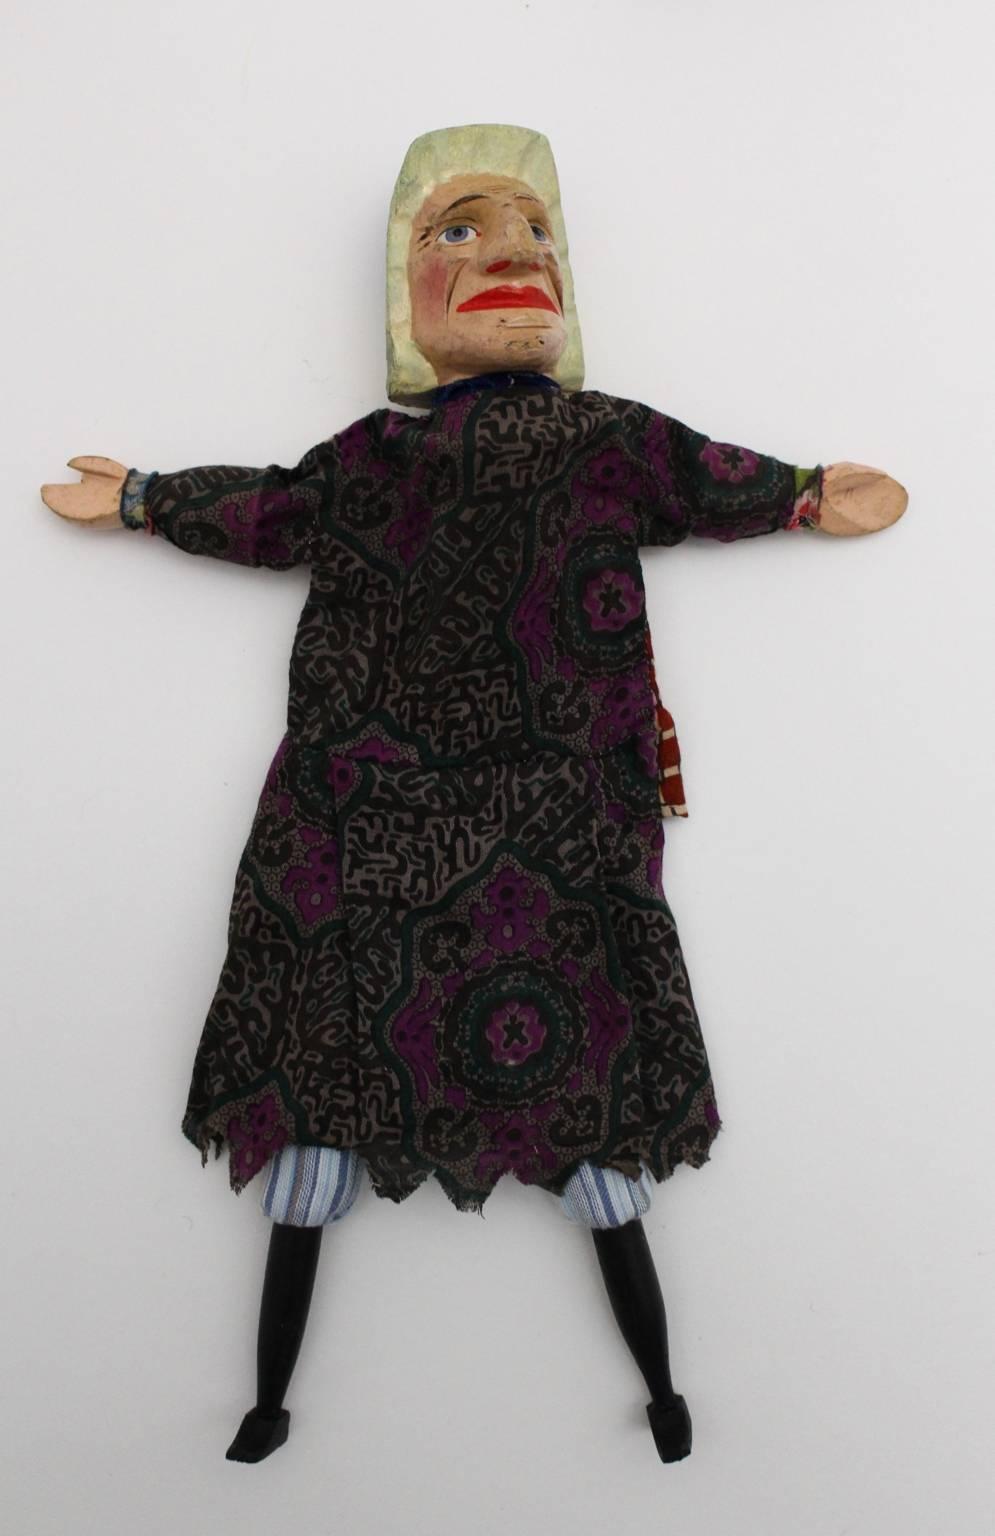 Early 20th Century Art Deco Vintage Glove Puppetry, circa 1920 For Sale